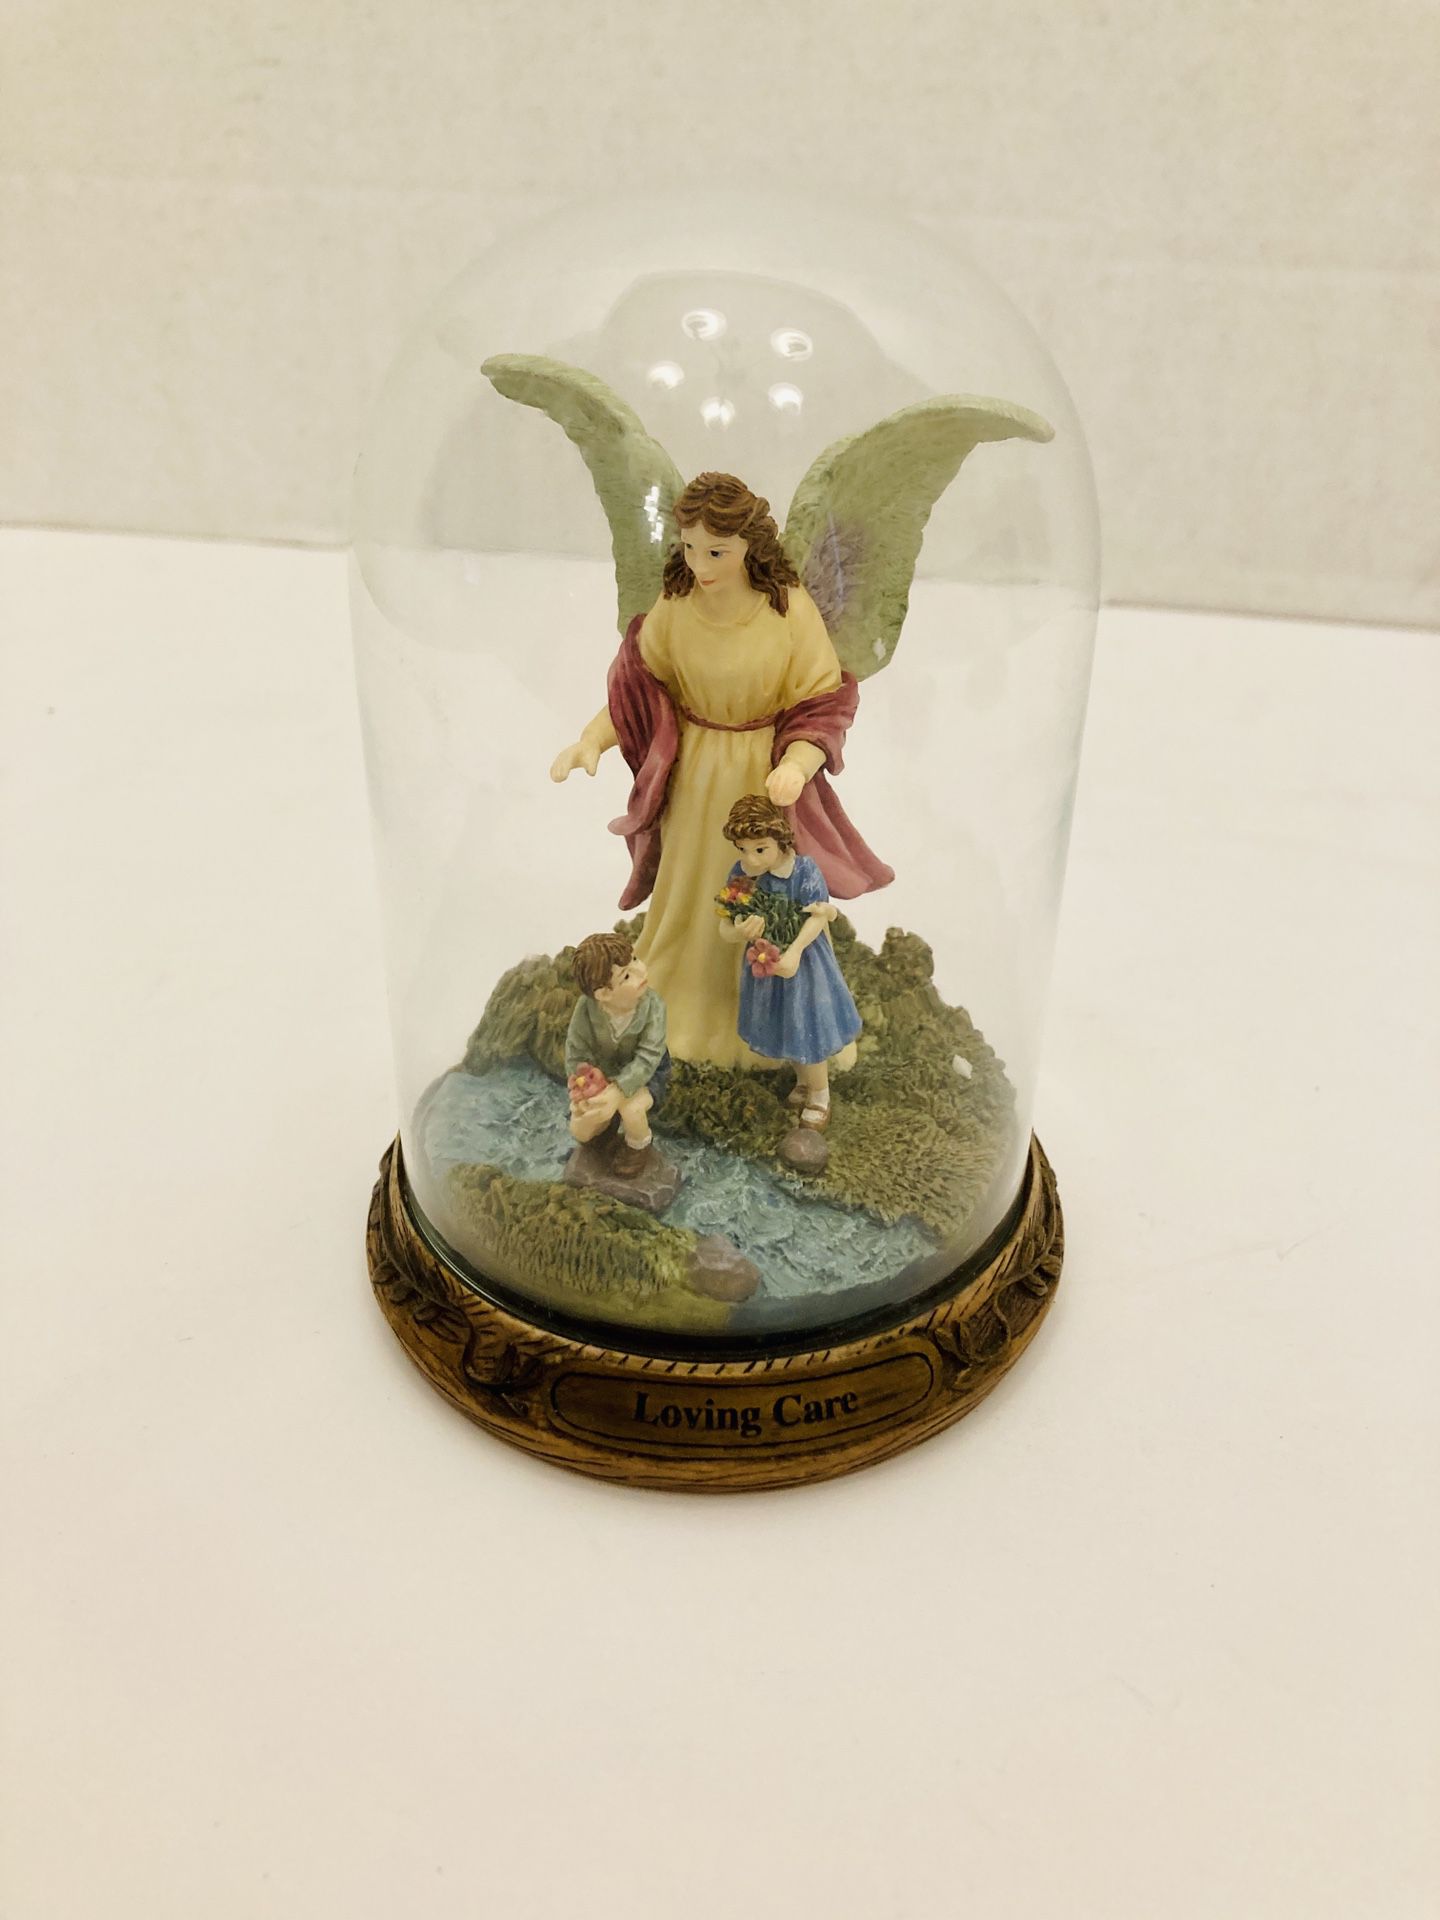 Vintage Limited Edition 1996 Bradford Exchange Someone Watching Over Me Collection Loving Care Guardian Angel Glass Dome Statue Figurine #2